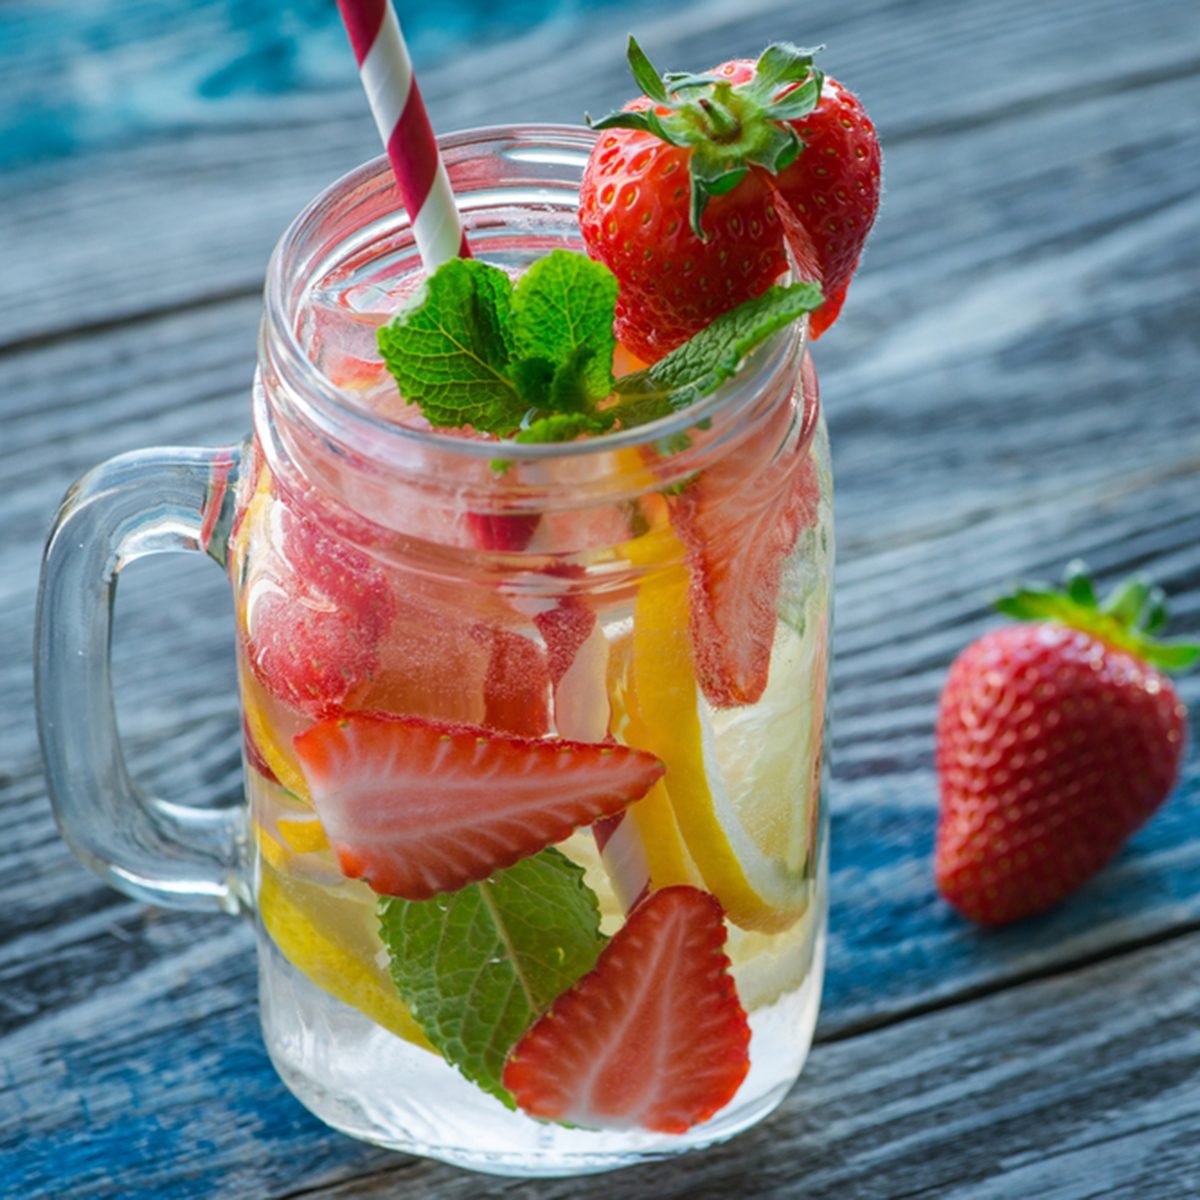 15 Fruit In Water Recipes and Infused Water Recipes Kids Will Love!